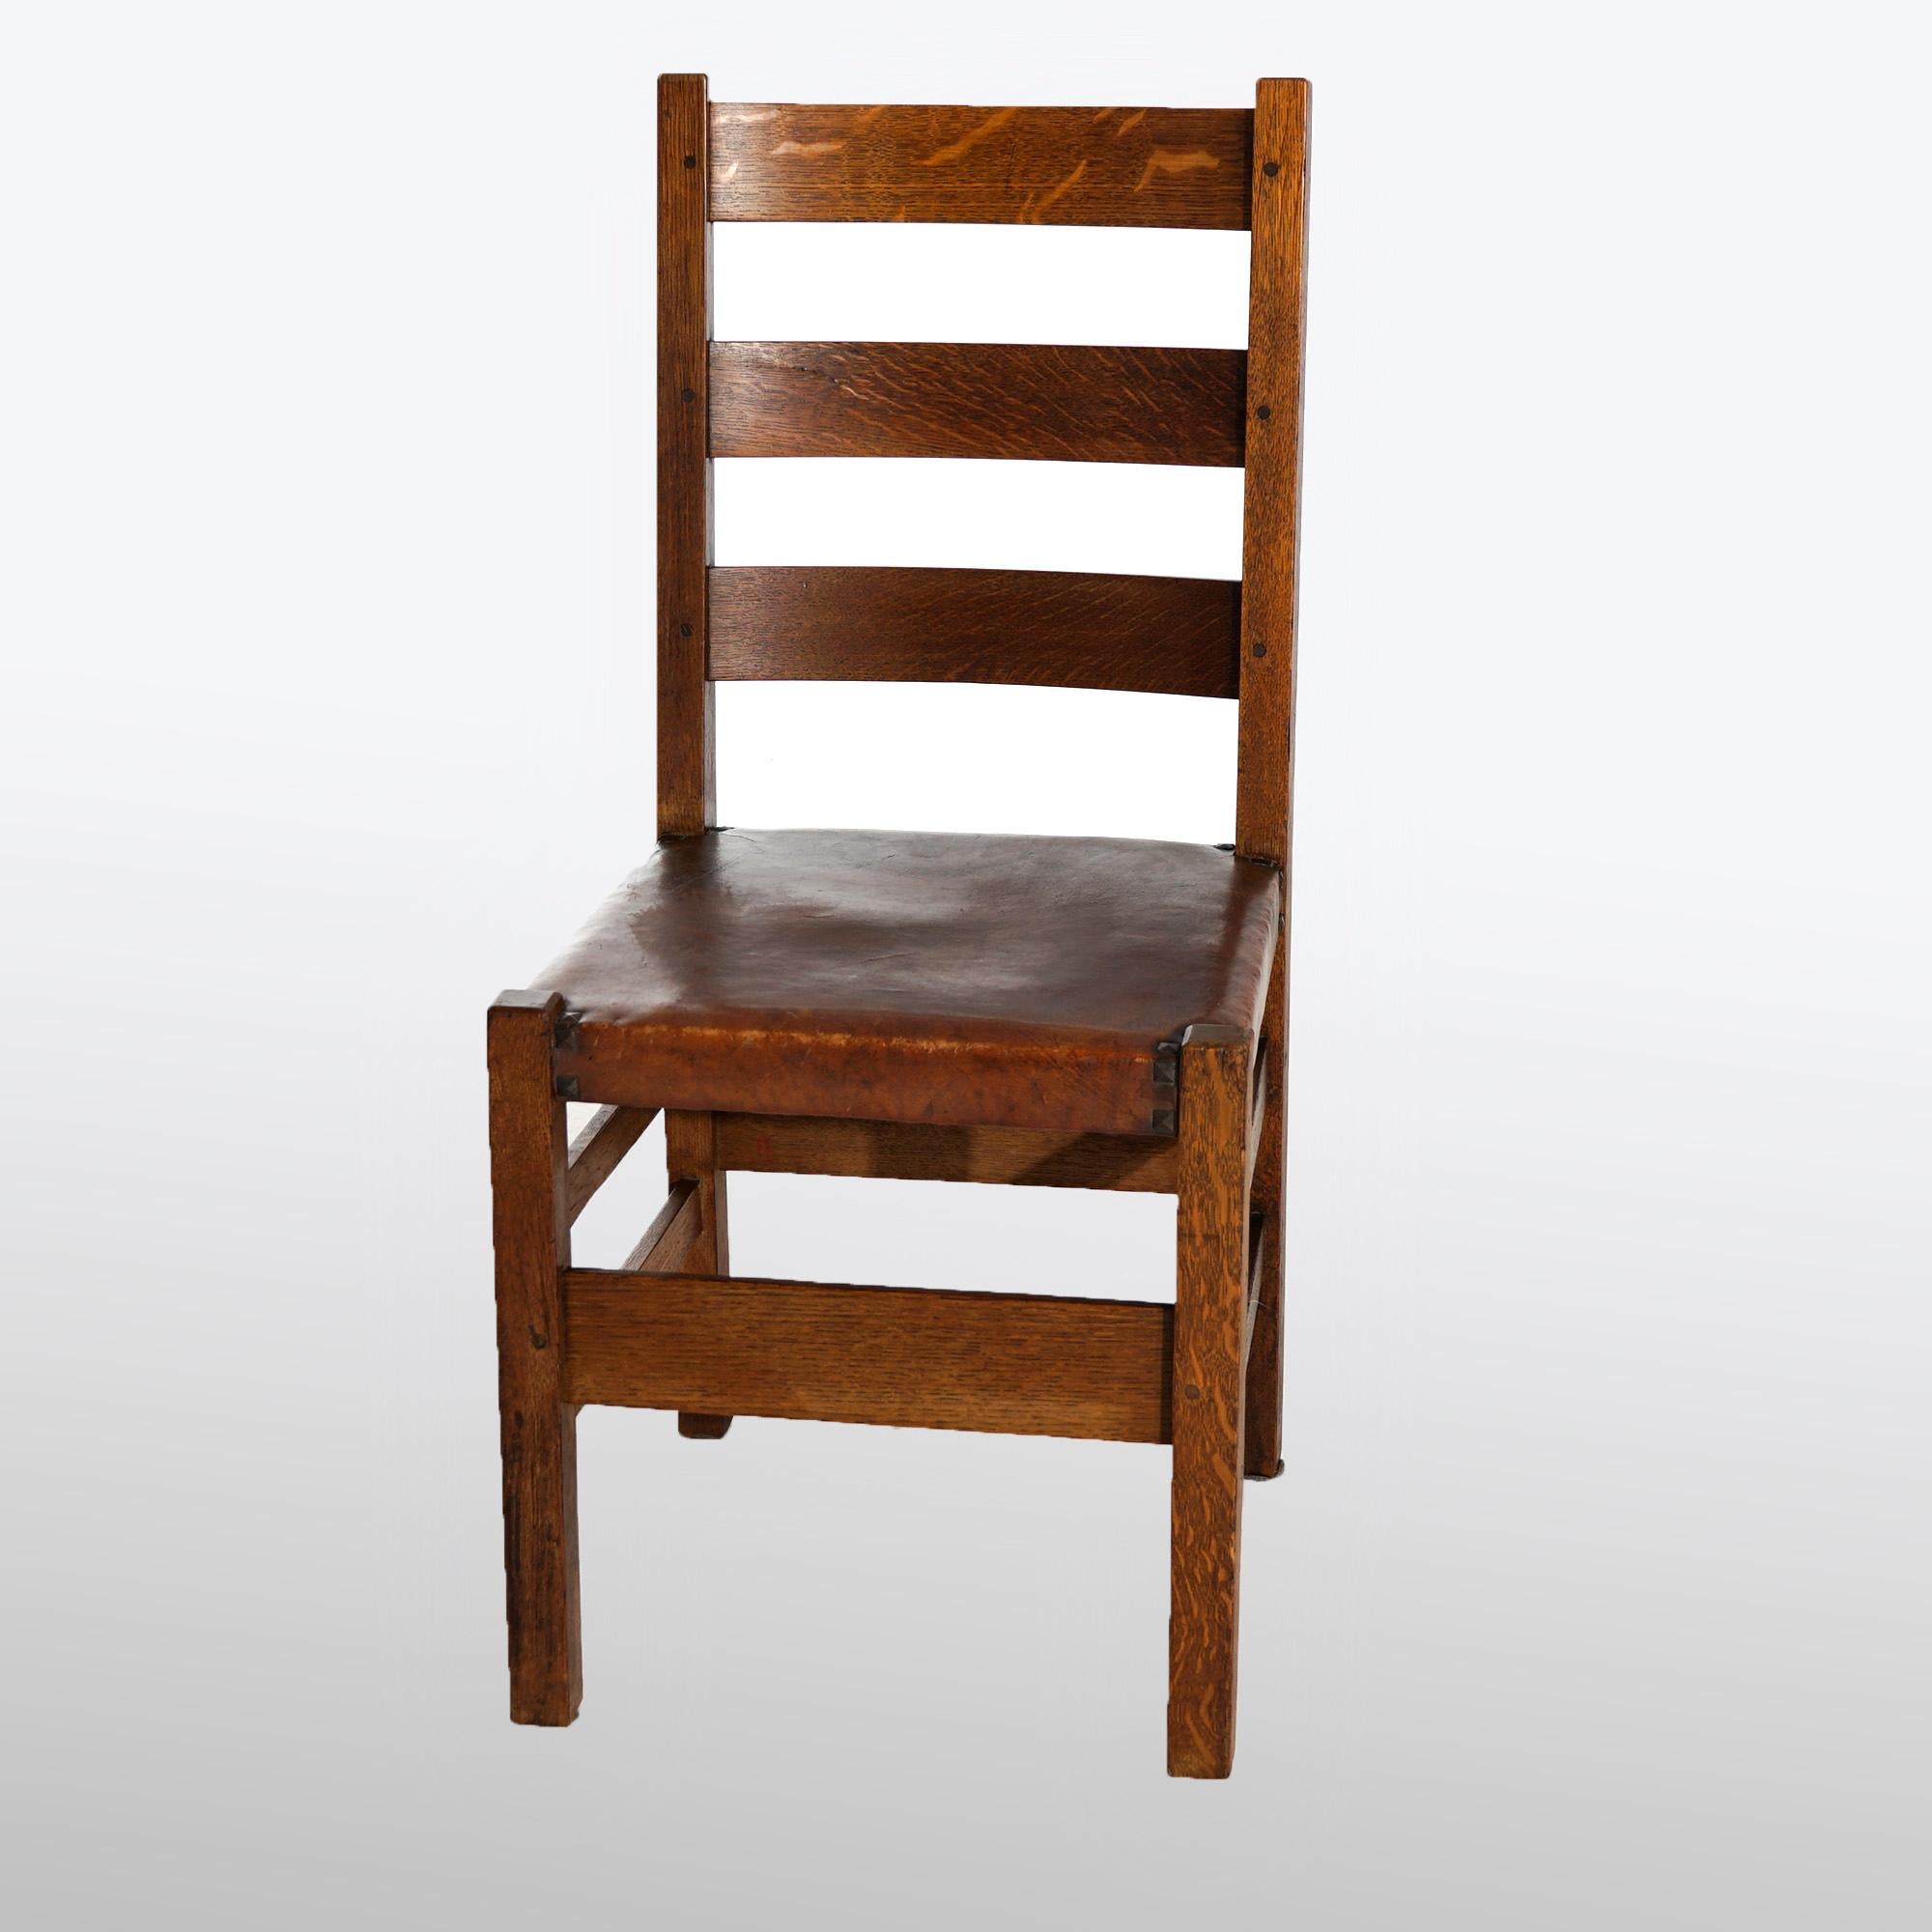 An antique Arts and Crafts set of six dining chairs by Gustav Stickley offer quarter sawn oak construction with ladder back over original seats and tacks, maker label as photographed, c1910

Measures- 36.25'' H x 17'' W x 19'' D; seat height